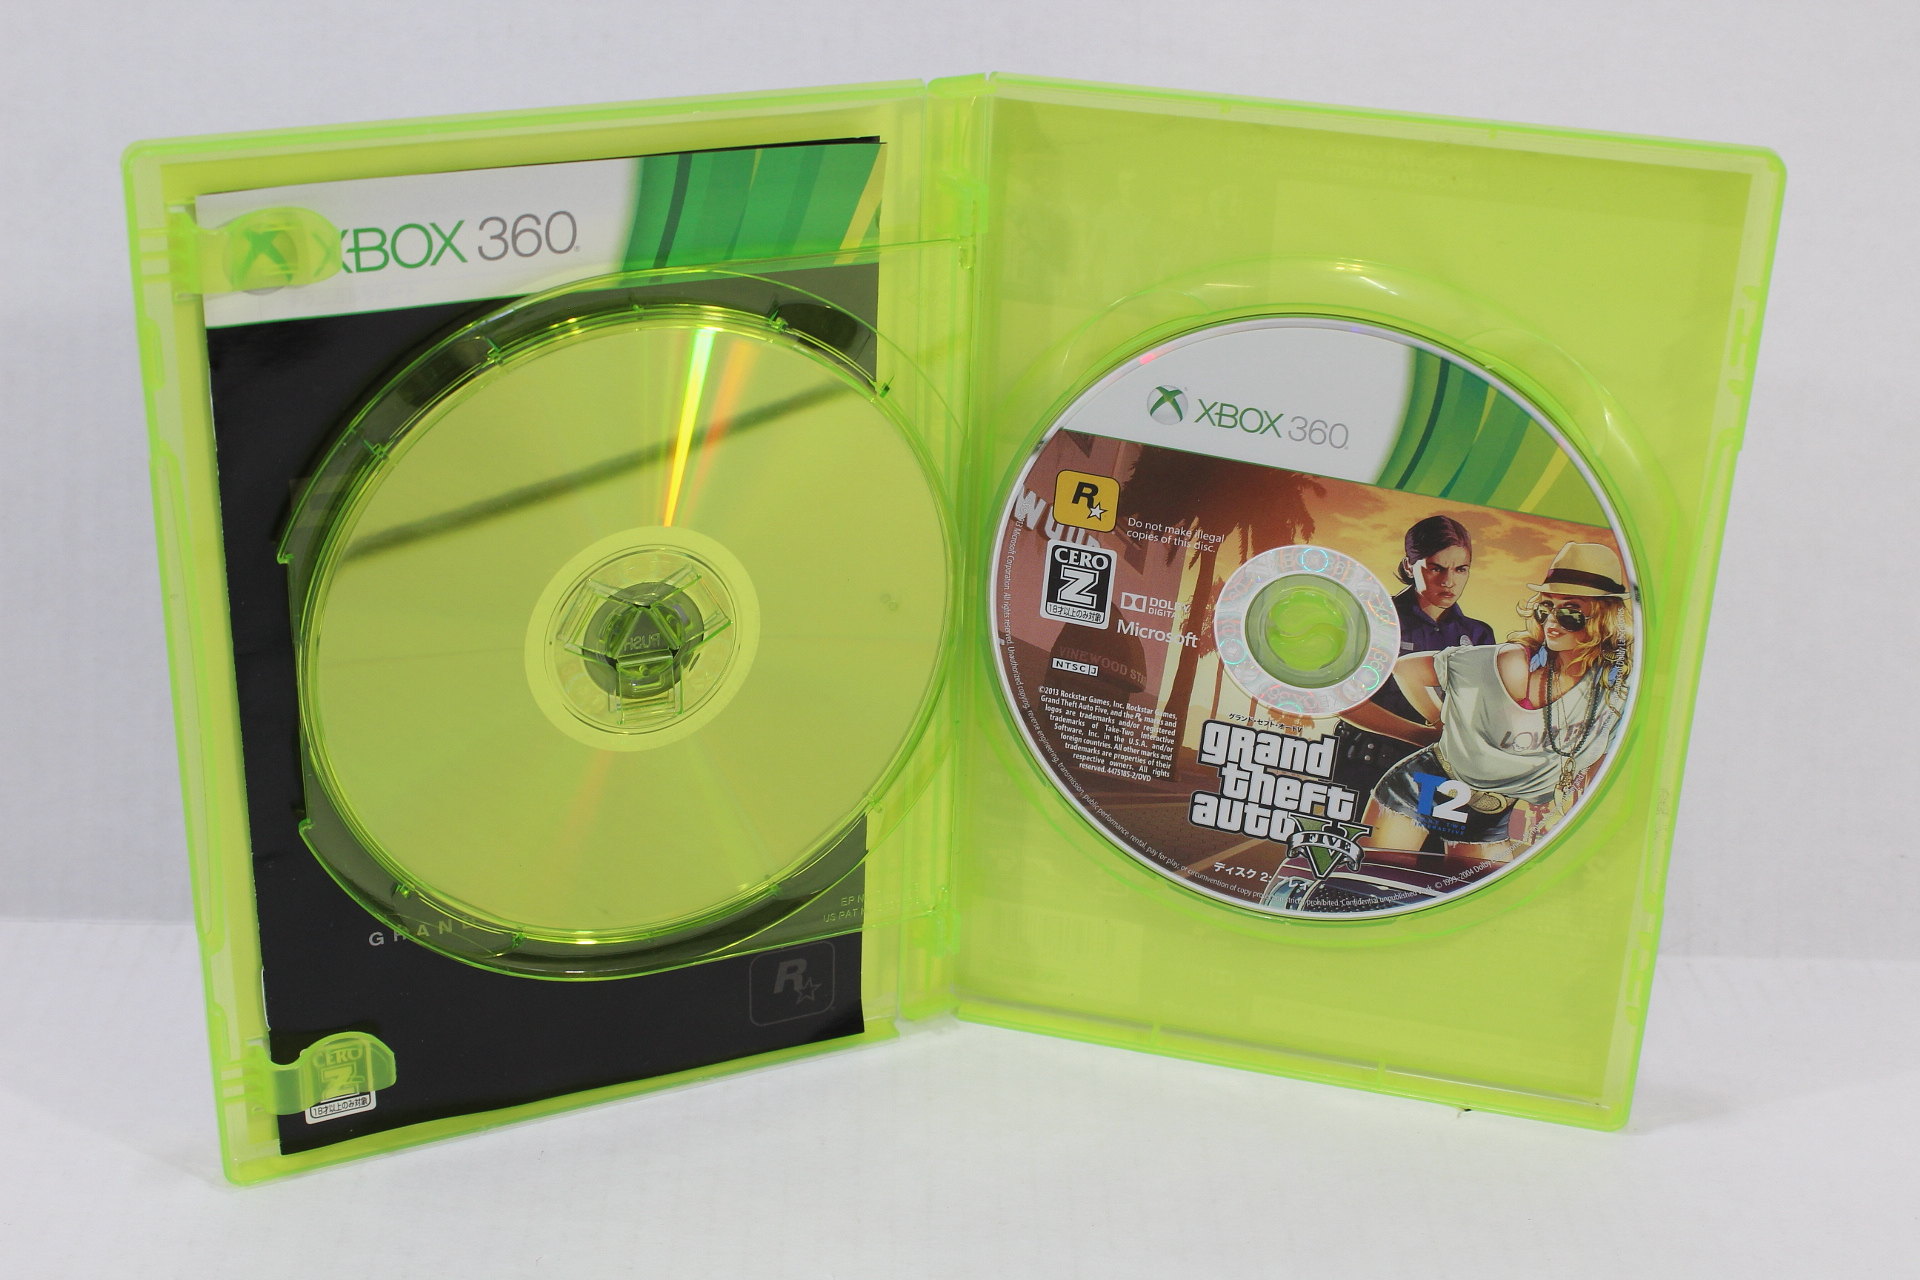 Grand Theft Auto V GTA 5 Xbox 360 Complete With Manual and Discs 1 & 2